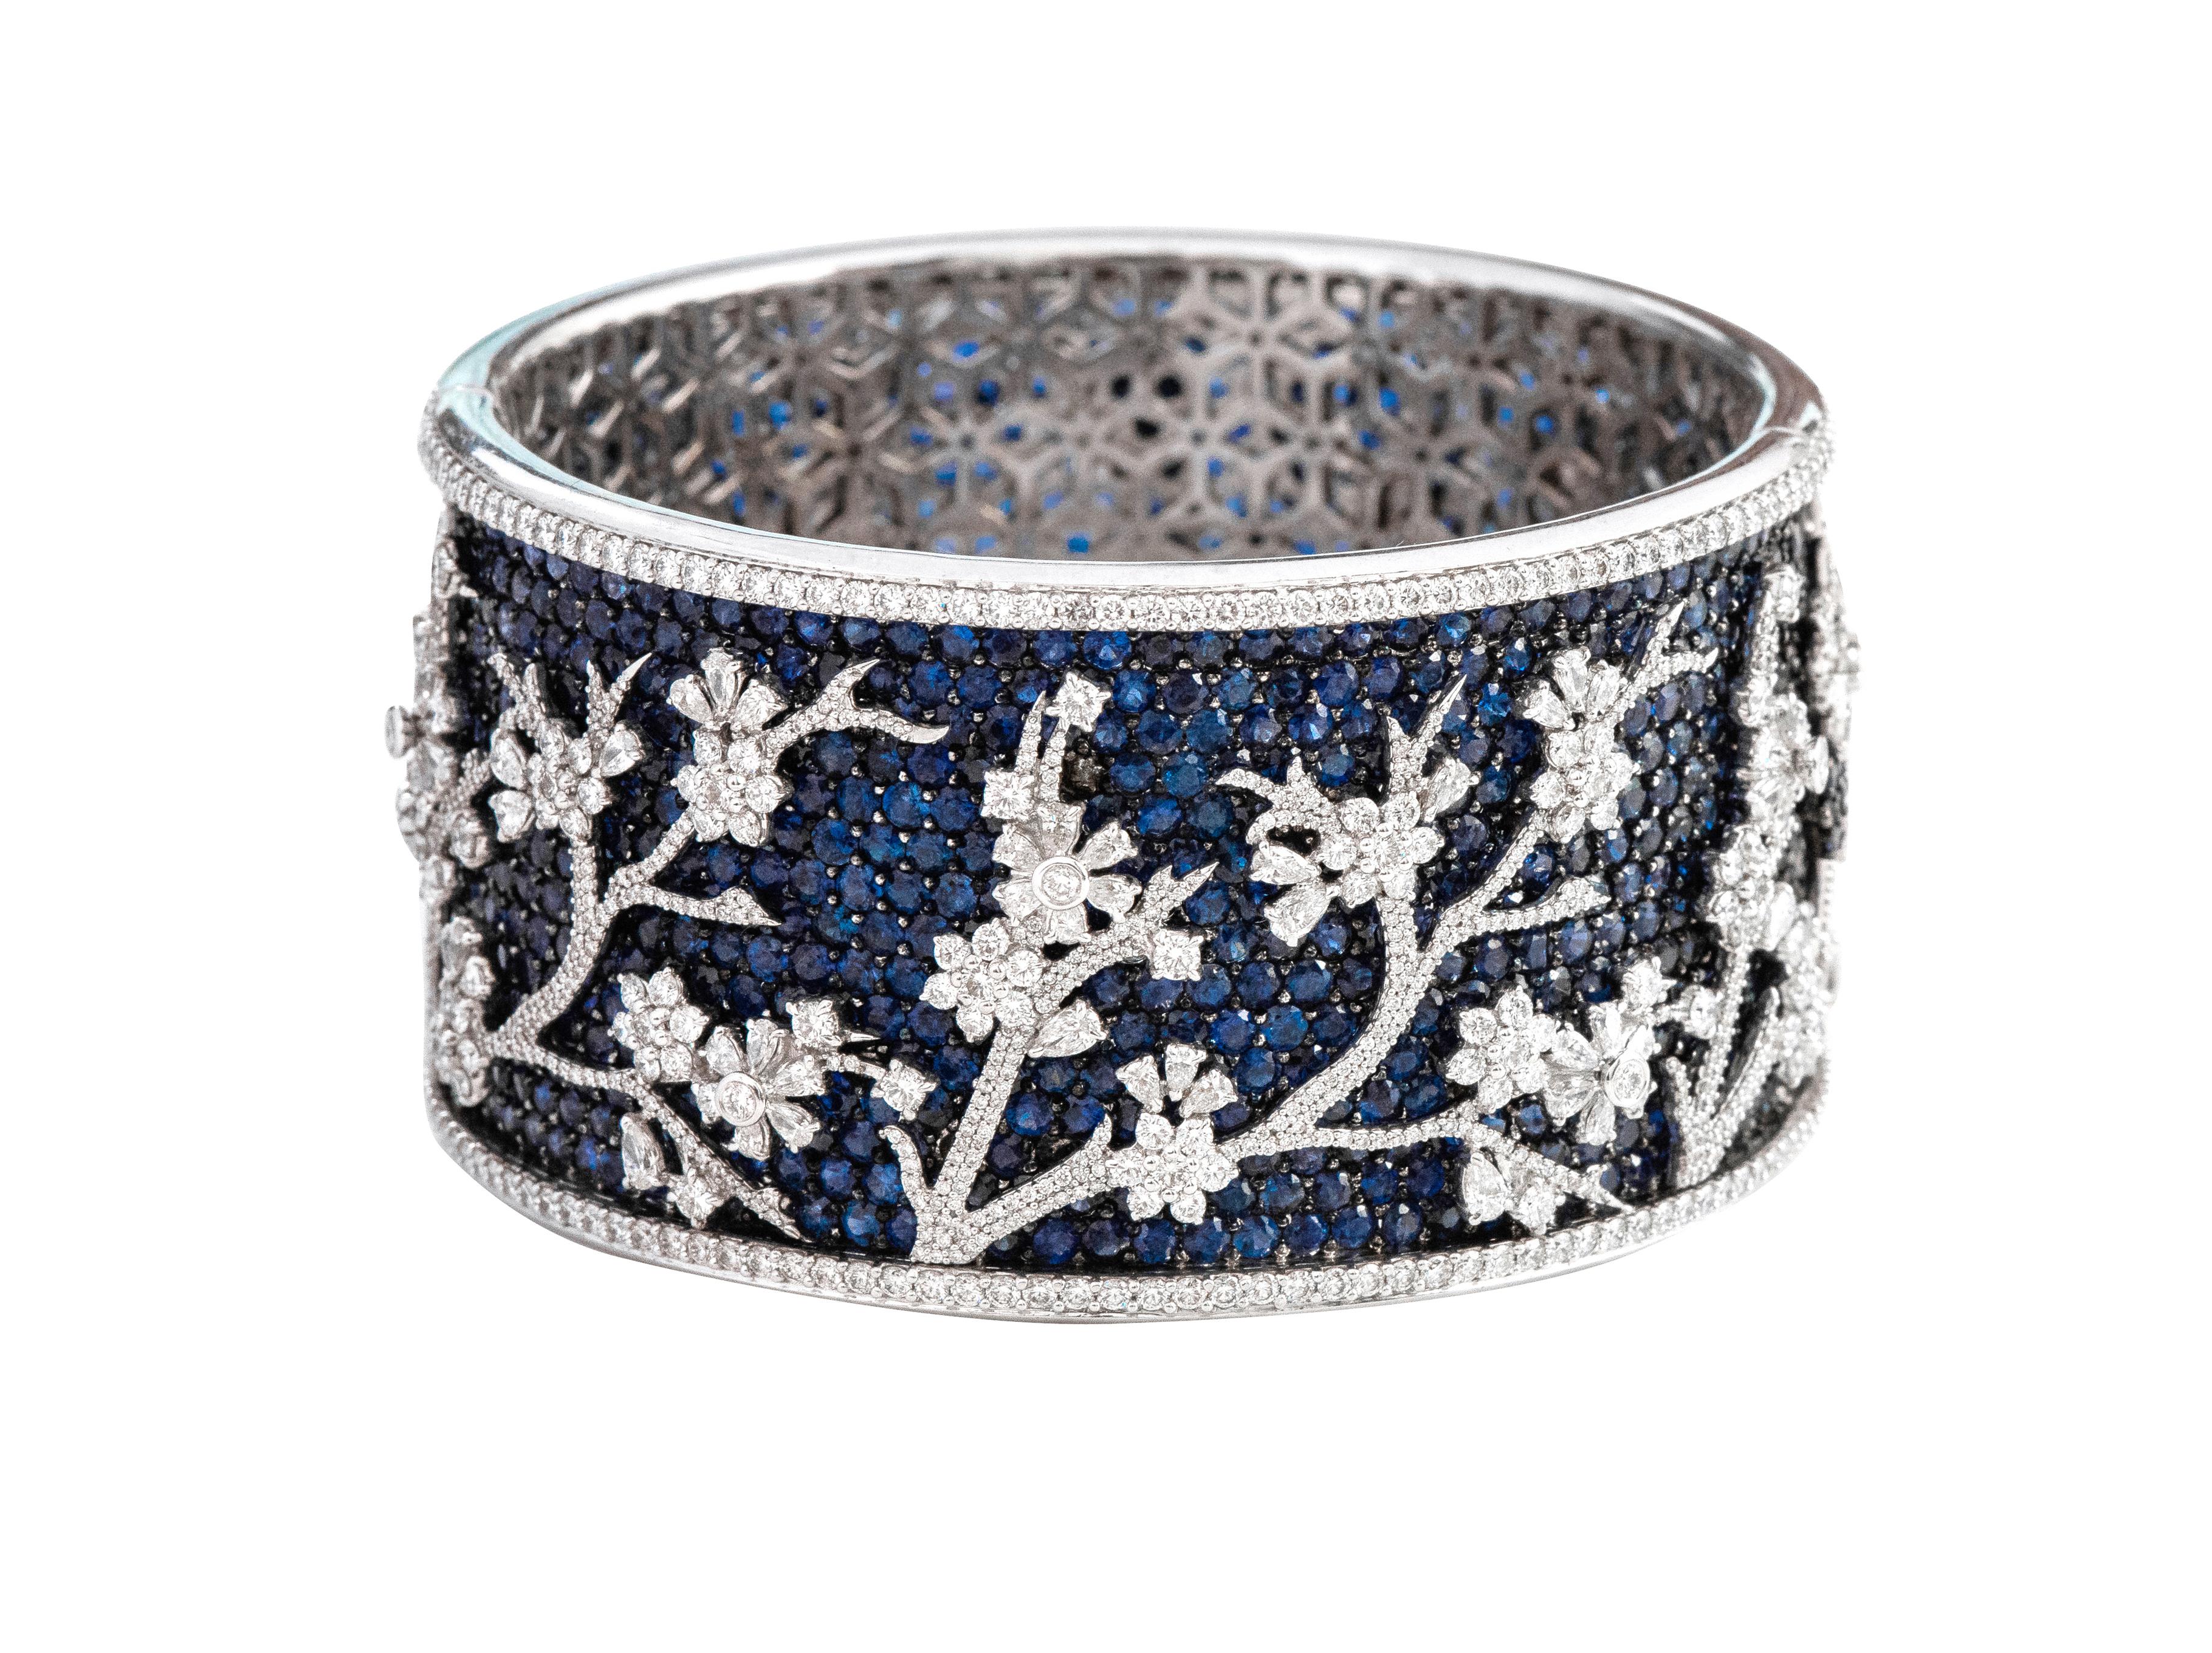 18 Karat White Gold 63.63 Carat Sapphire and Diamond Bangle in Modern Style 

This nouveau riche style royal blue sapphire and diamond bangle is incredibly artisanal. The pave set round blue sapphire forms the majestic base of the bangle with the